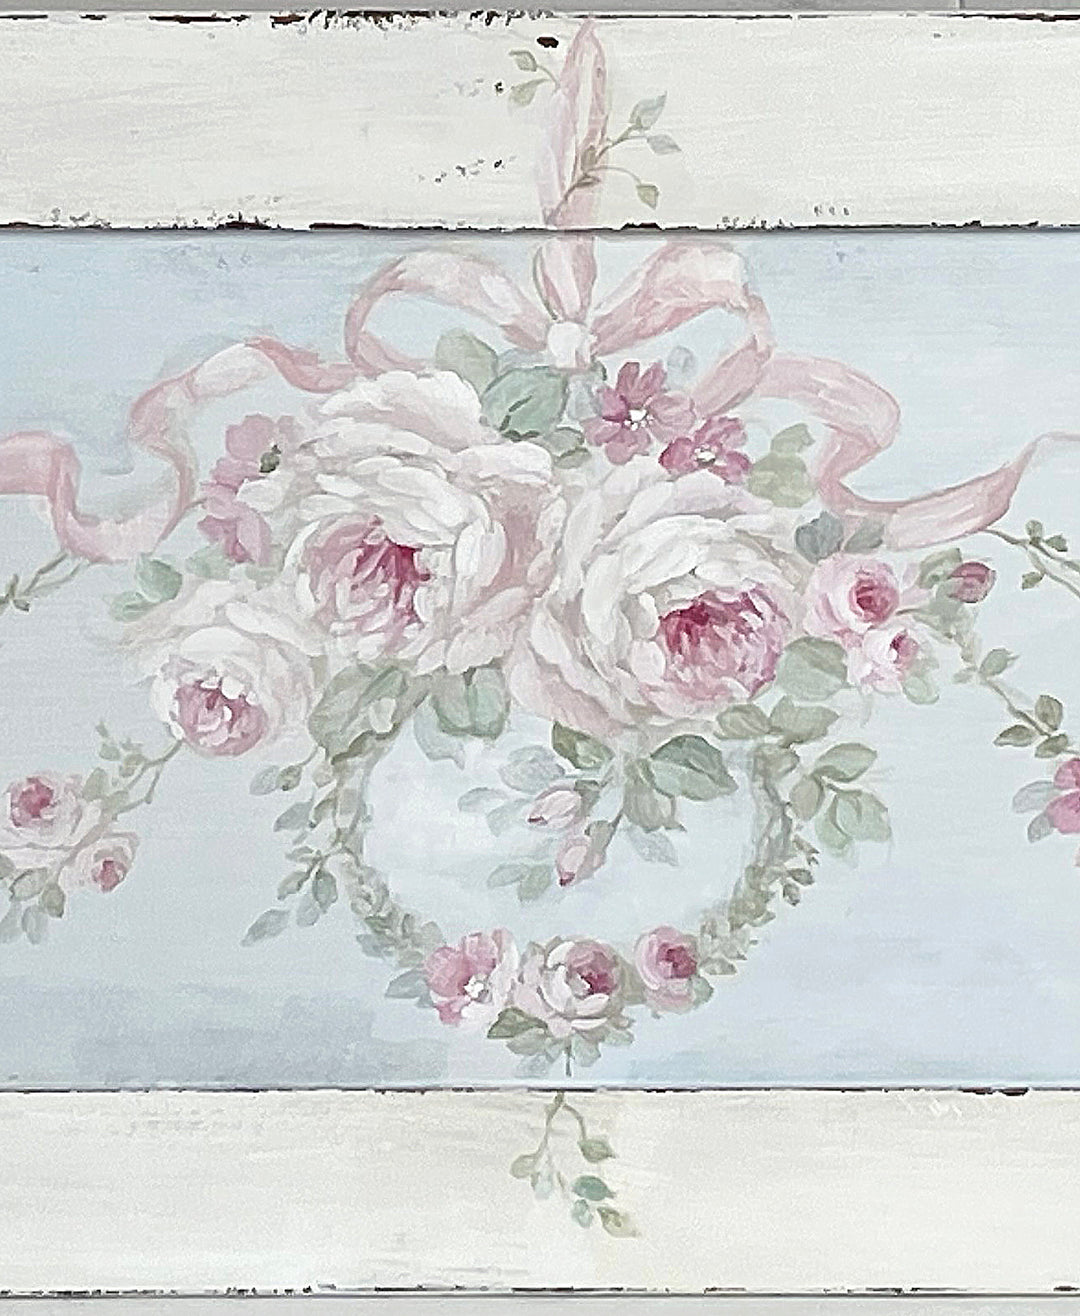 Shabby Chic Vintage Large French Roses Wreath and Garland Wood Panel Romantic Original by Debi Coules